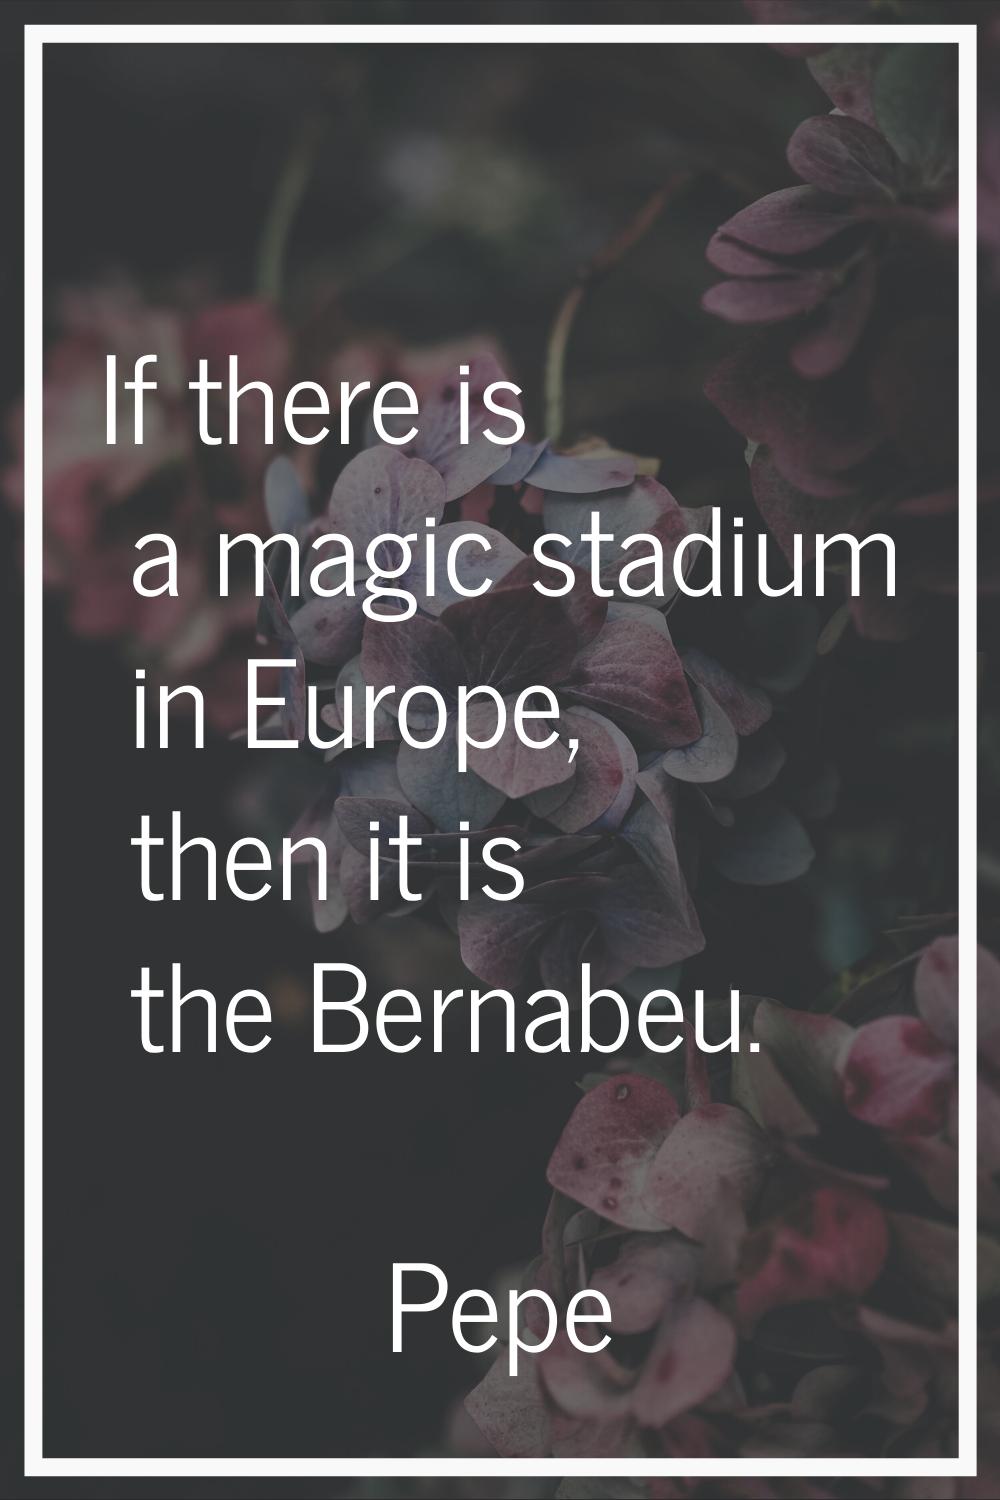 If there is a magic stadium in Europe, then it is the Bernabeu.